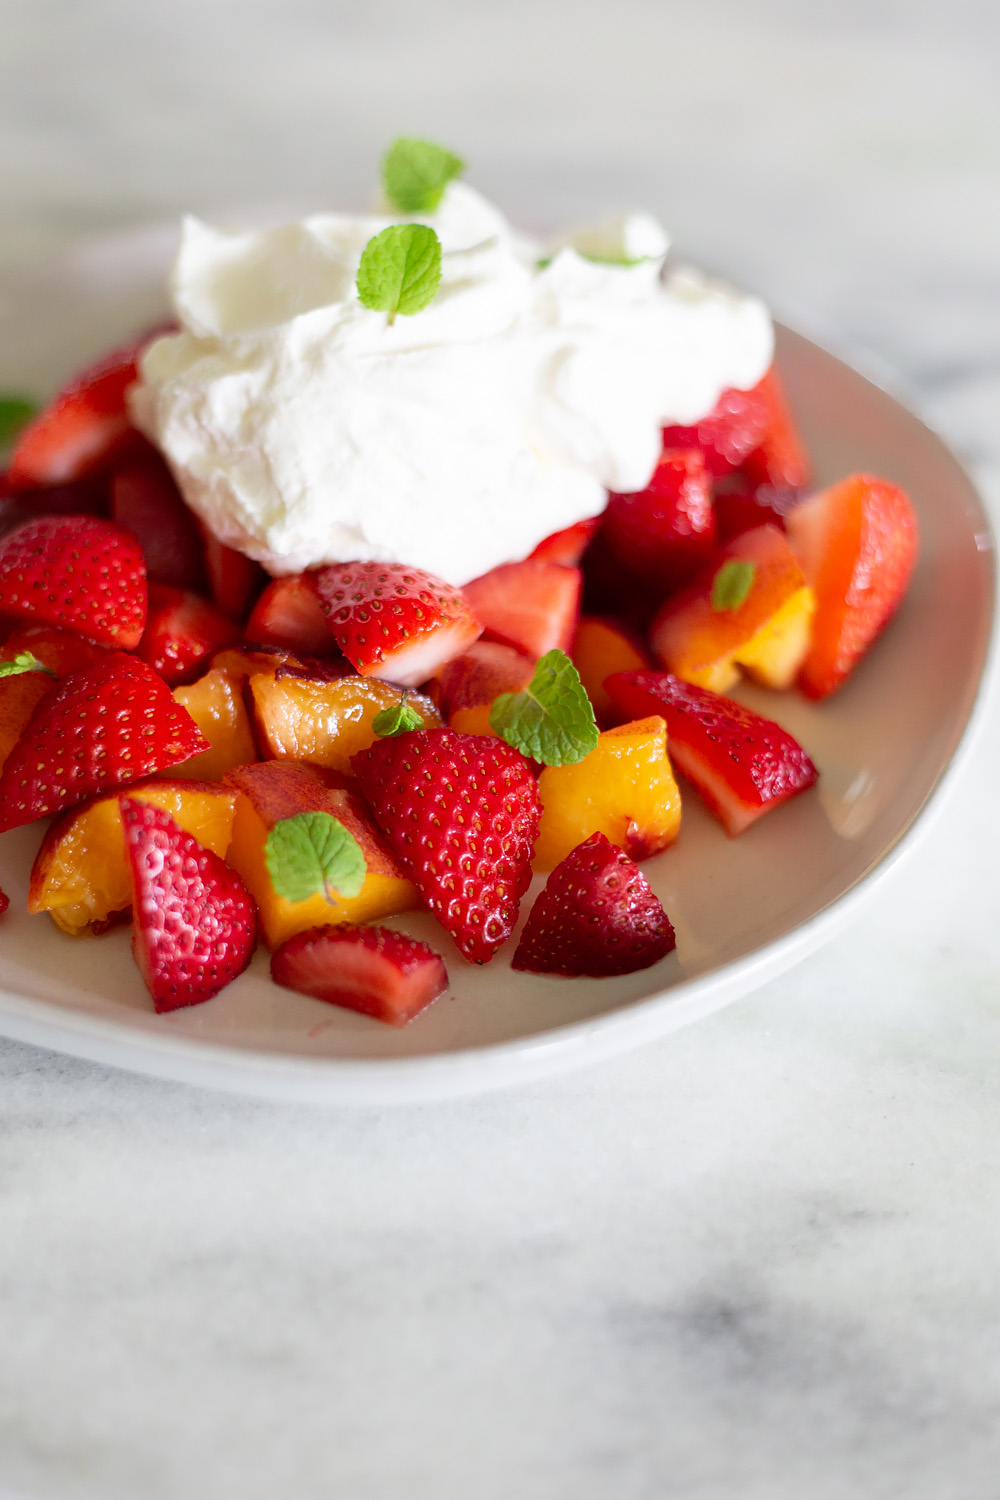 Peaches and Strawberries with Almond Whipped Cream on a plate